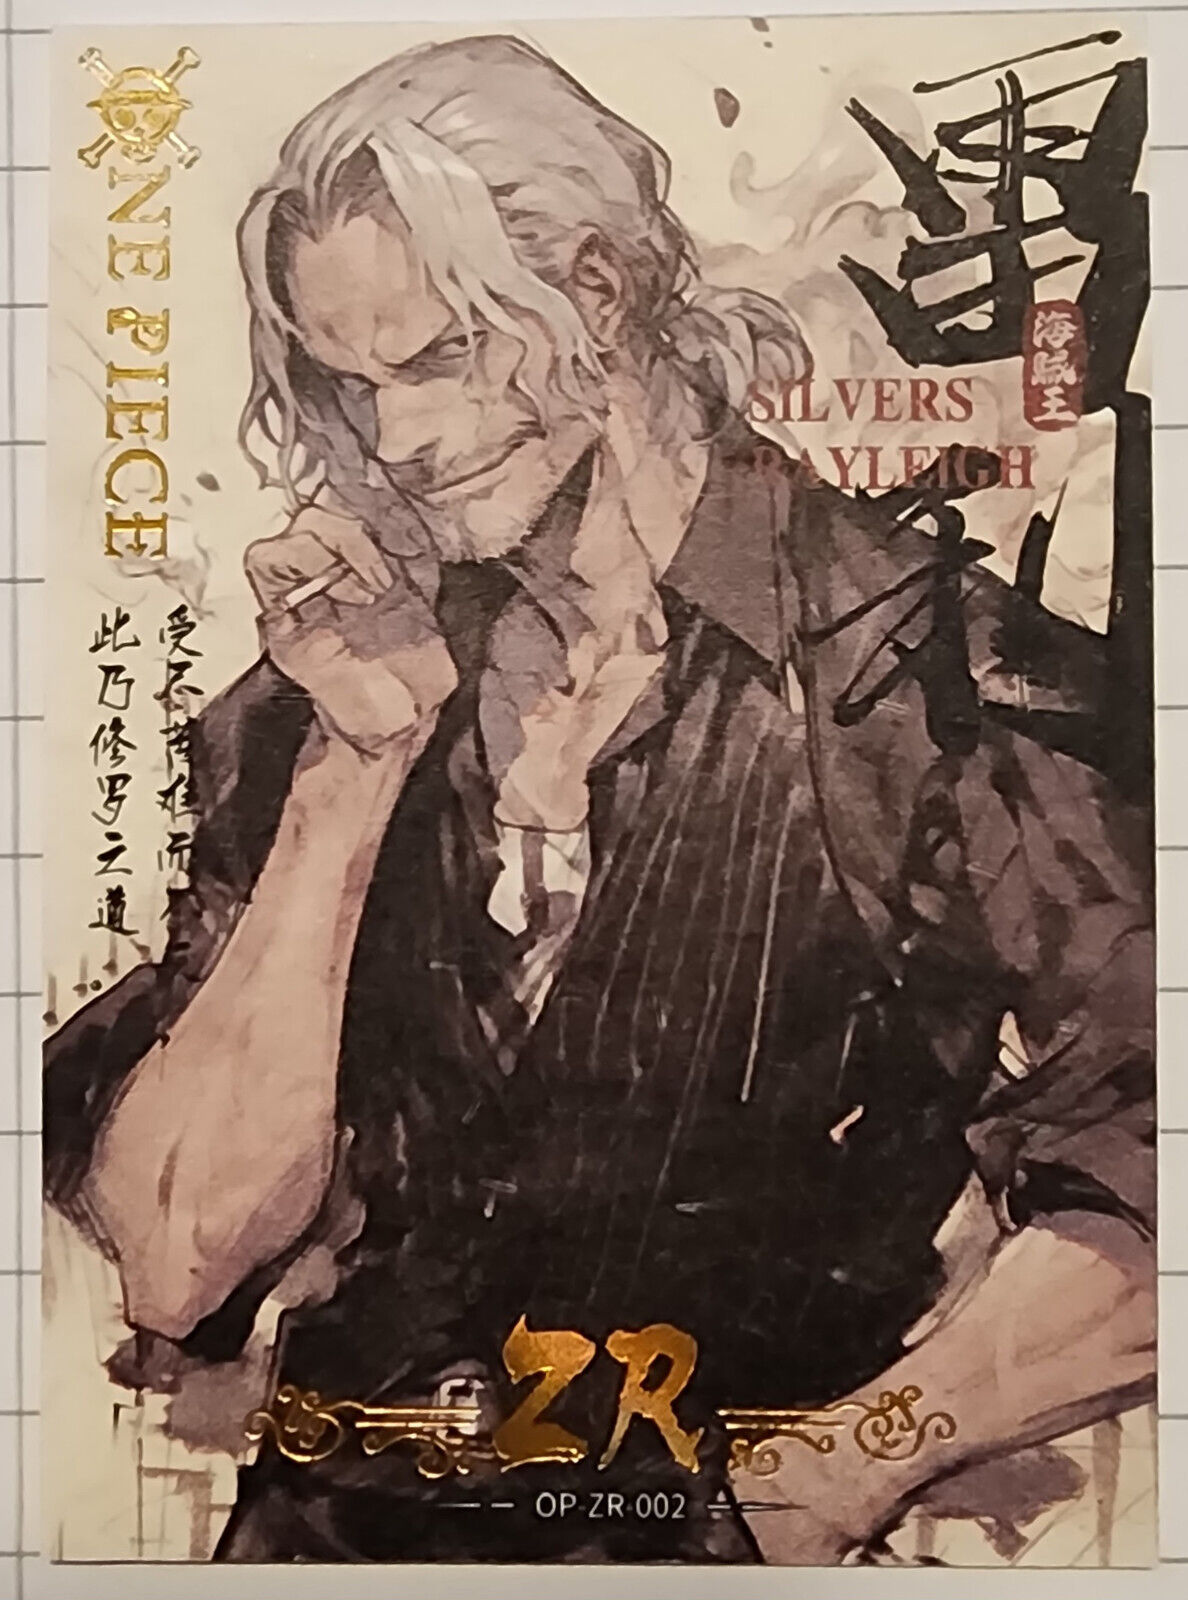 One Piece Endless Treasure 6  - OP-ZR-002  - Silvers Rayleigh US Seller